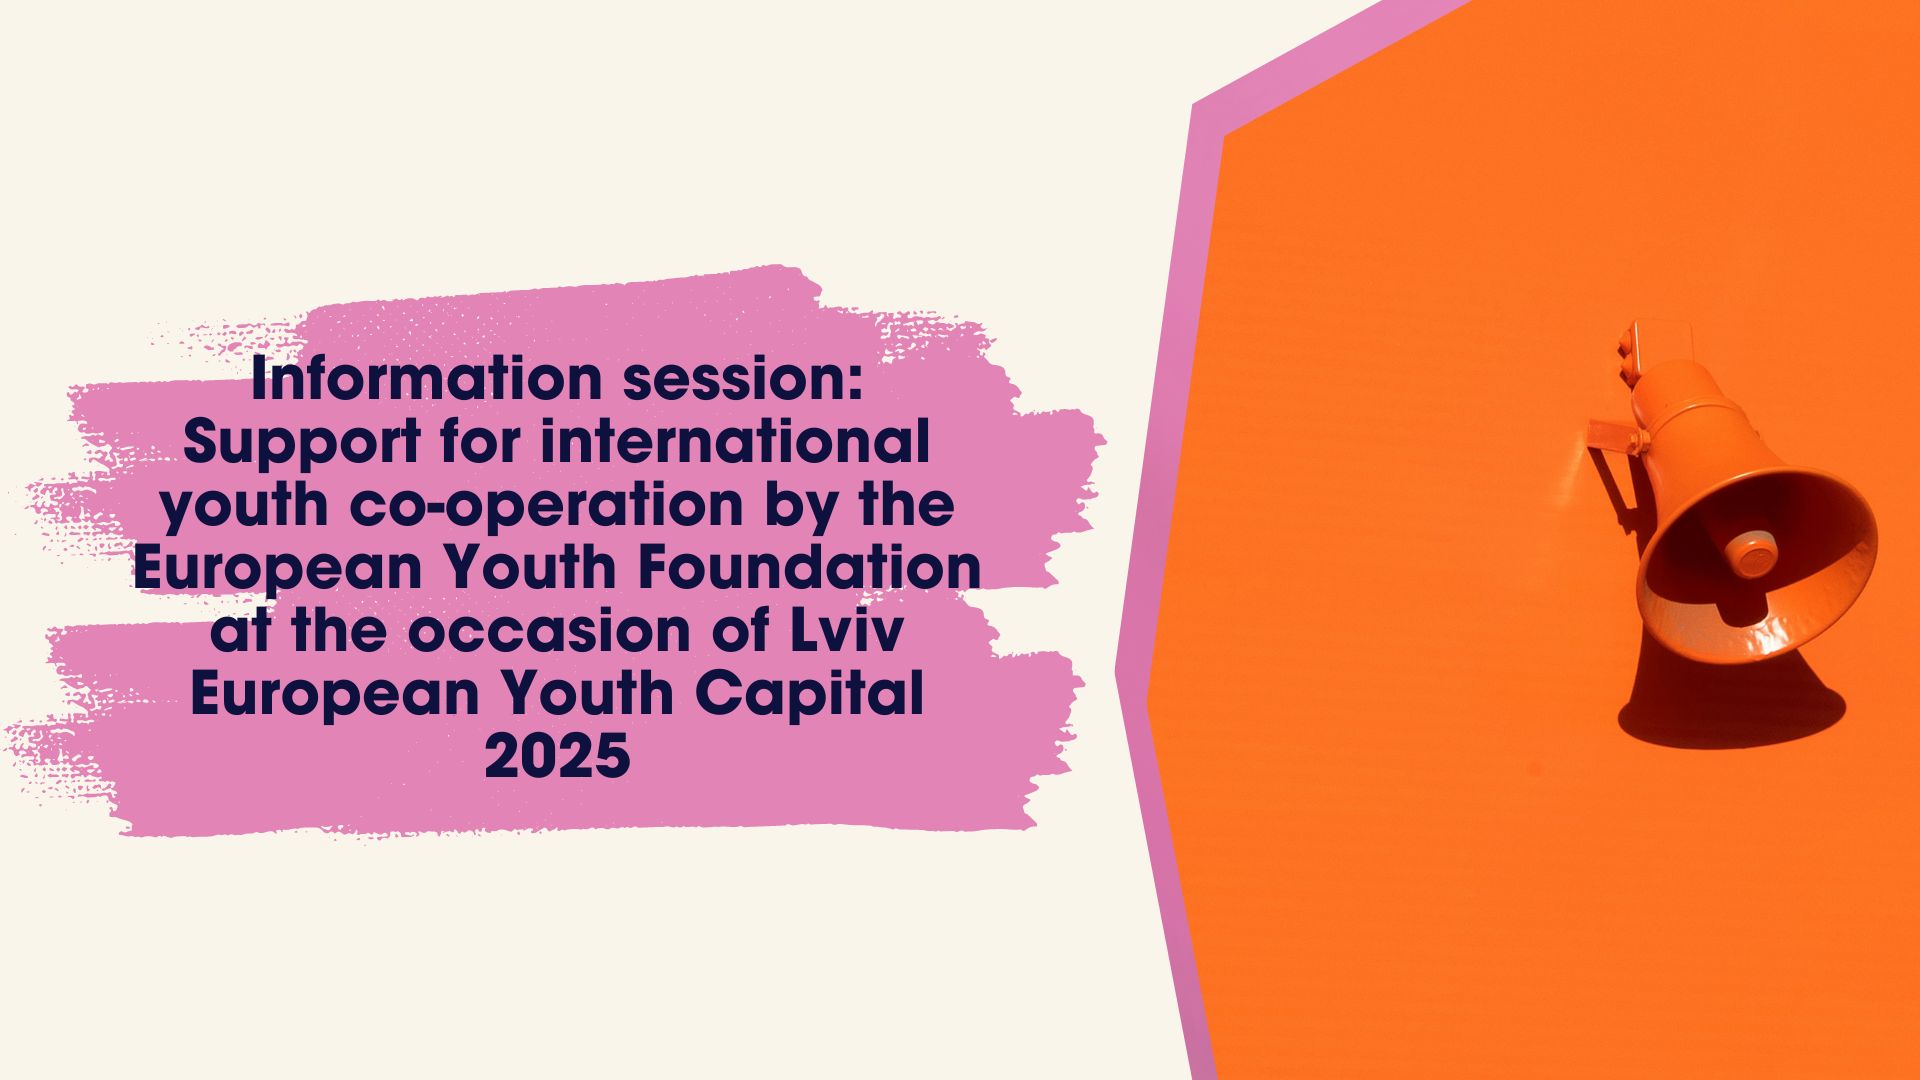 Information session: Support for international youth co-operation by the European Youth Foundation at the occasion of Lviv European Youth Capital 2025